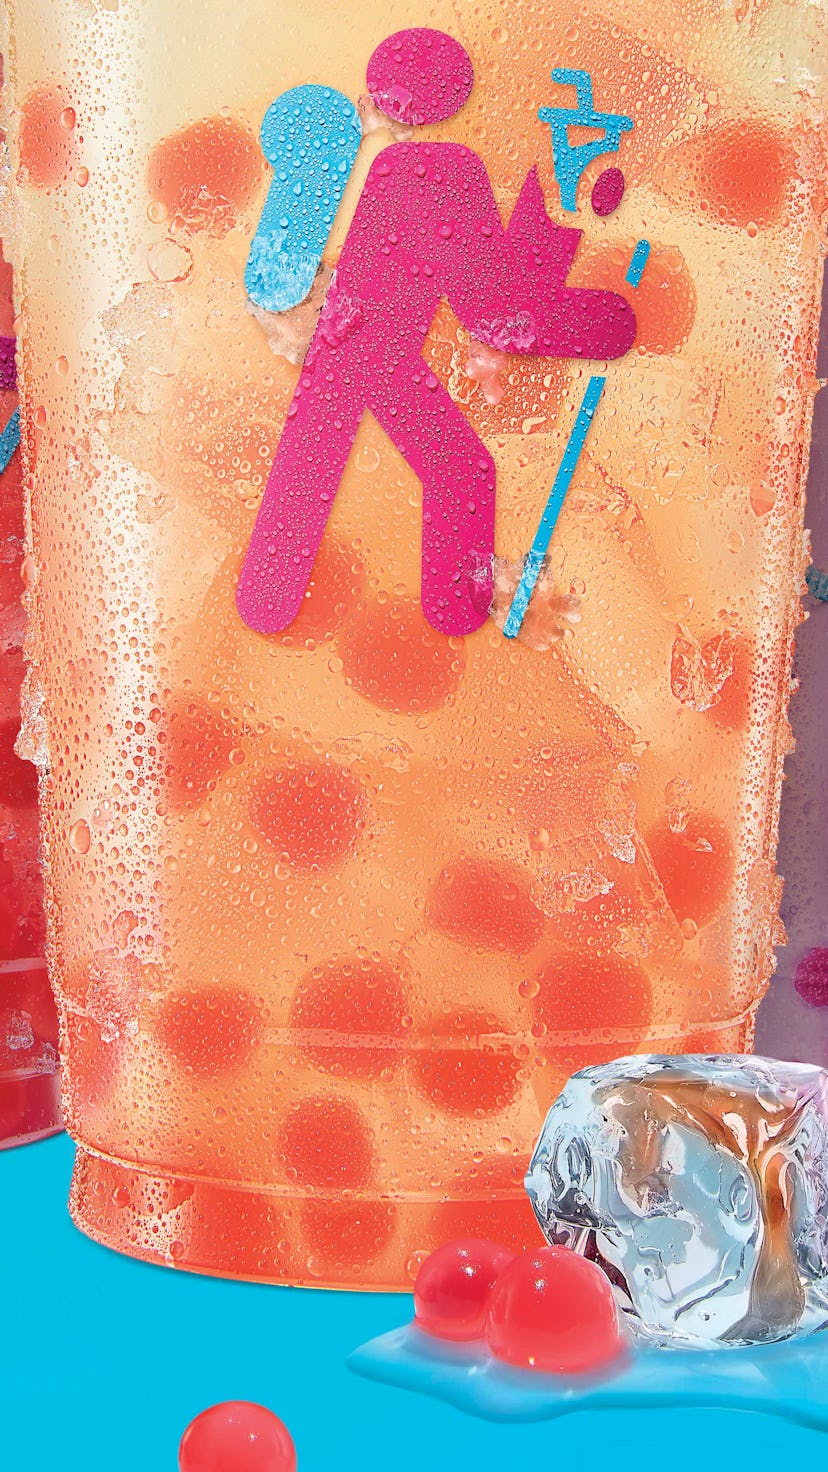 Add Dunkin' Popping Bubbles to these 11 drinks for a strawberry twist.